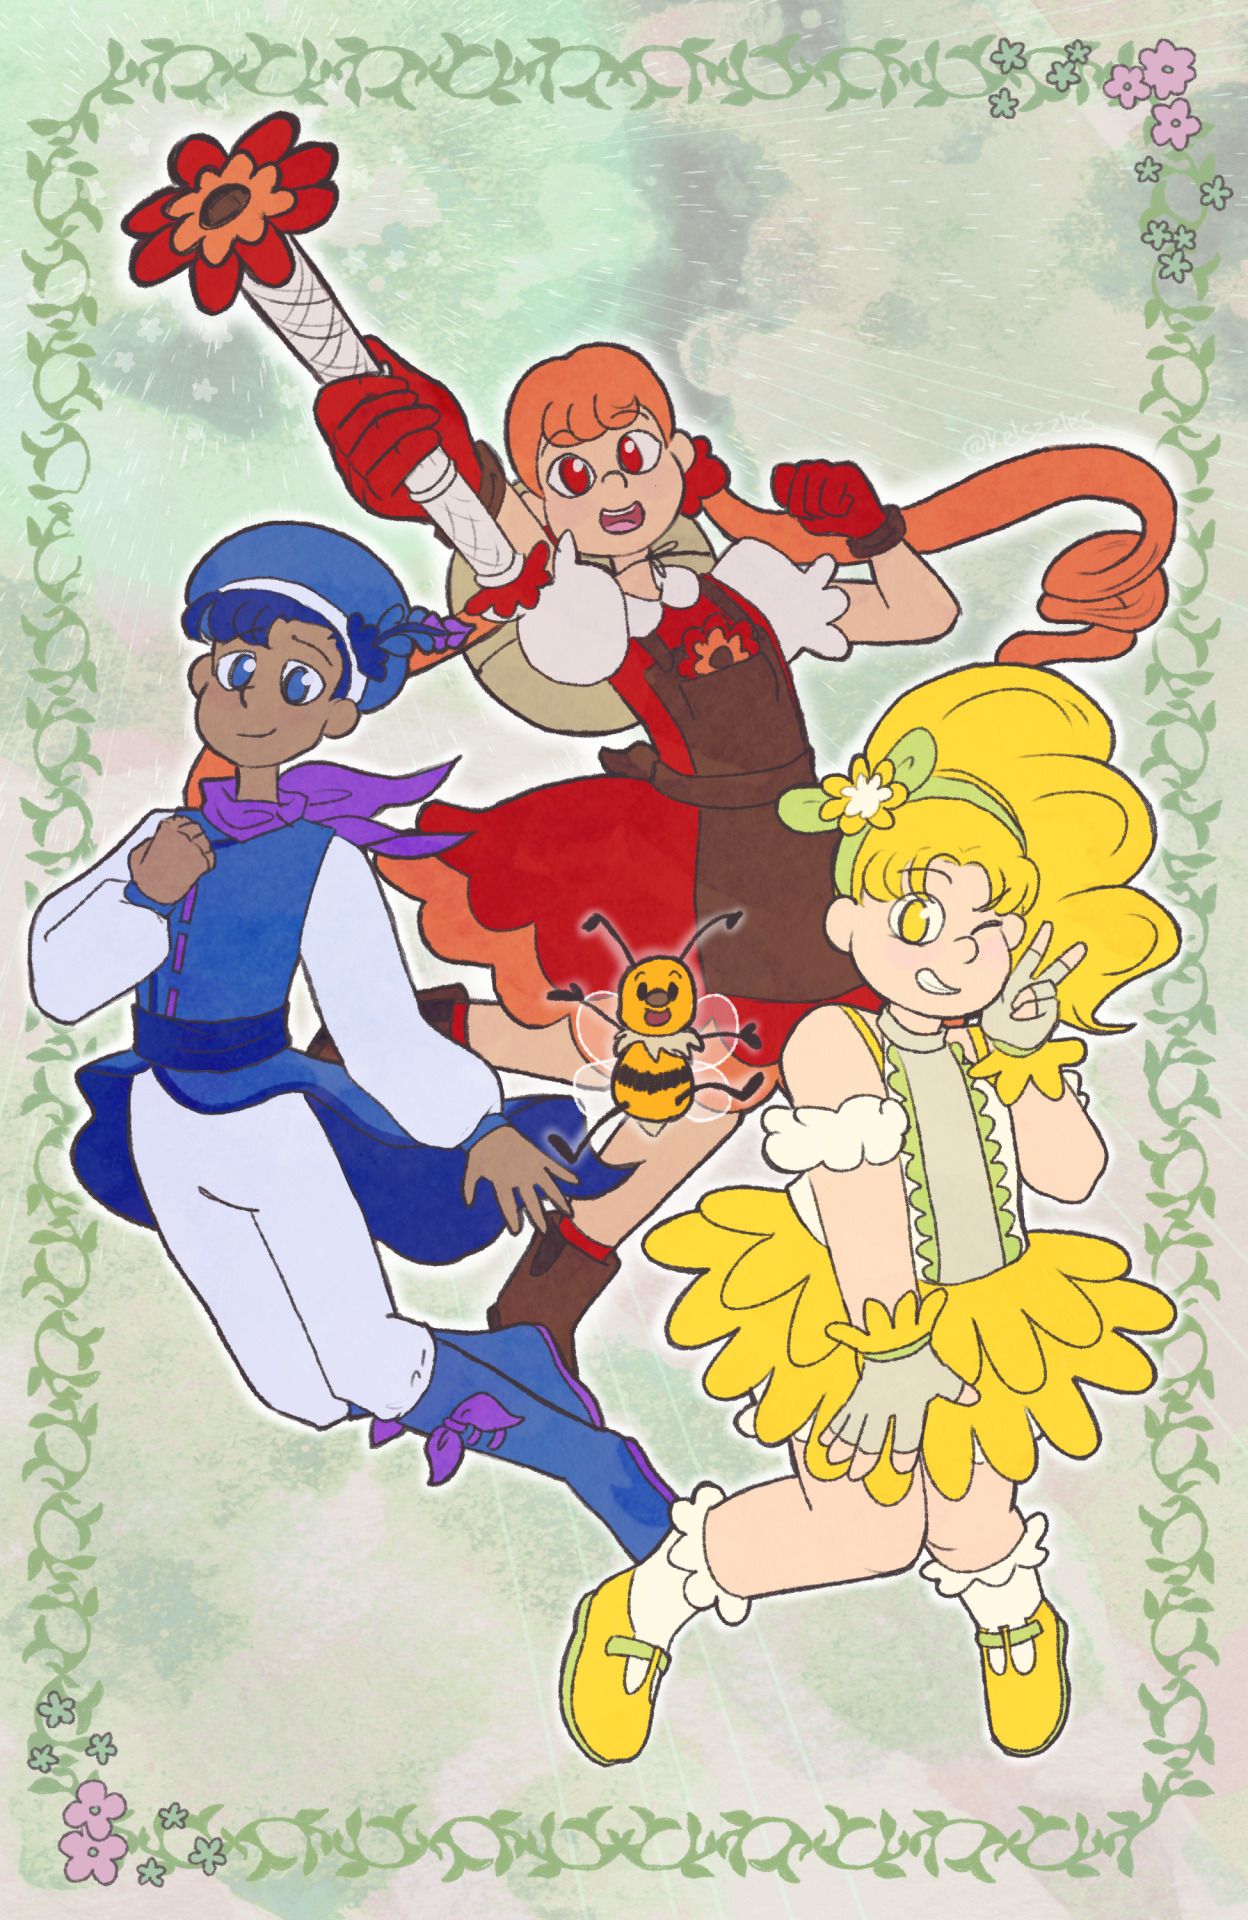 my original magical girl characters, the Garden Guardians (and their friends) #gg#magical girl